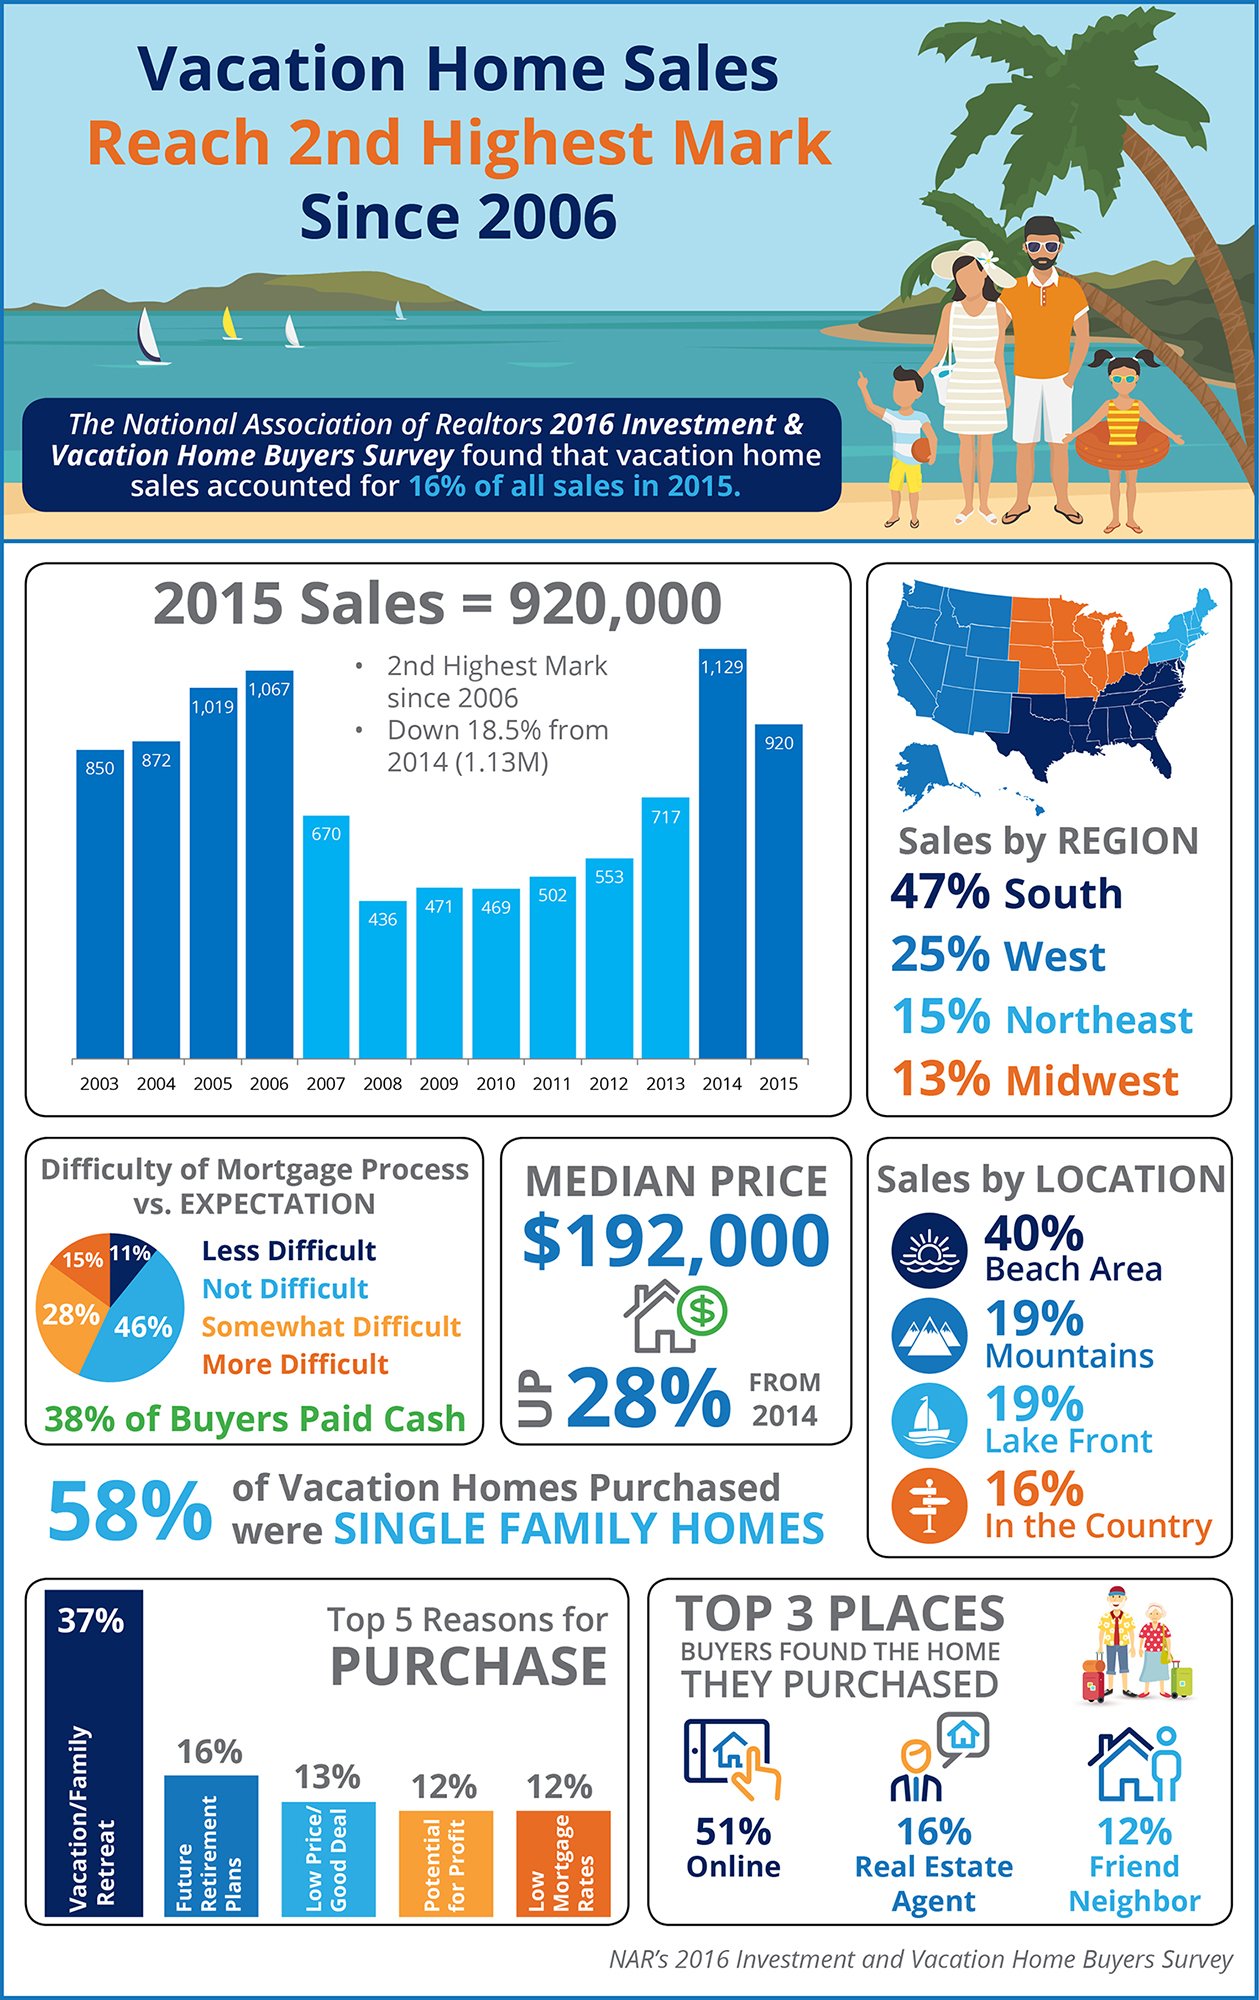 Vacation Home Sales Reach 2nd Highest Mark Since 2006 [INFOGRAPHIC] | Simplifying The Market